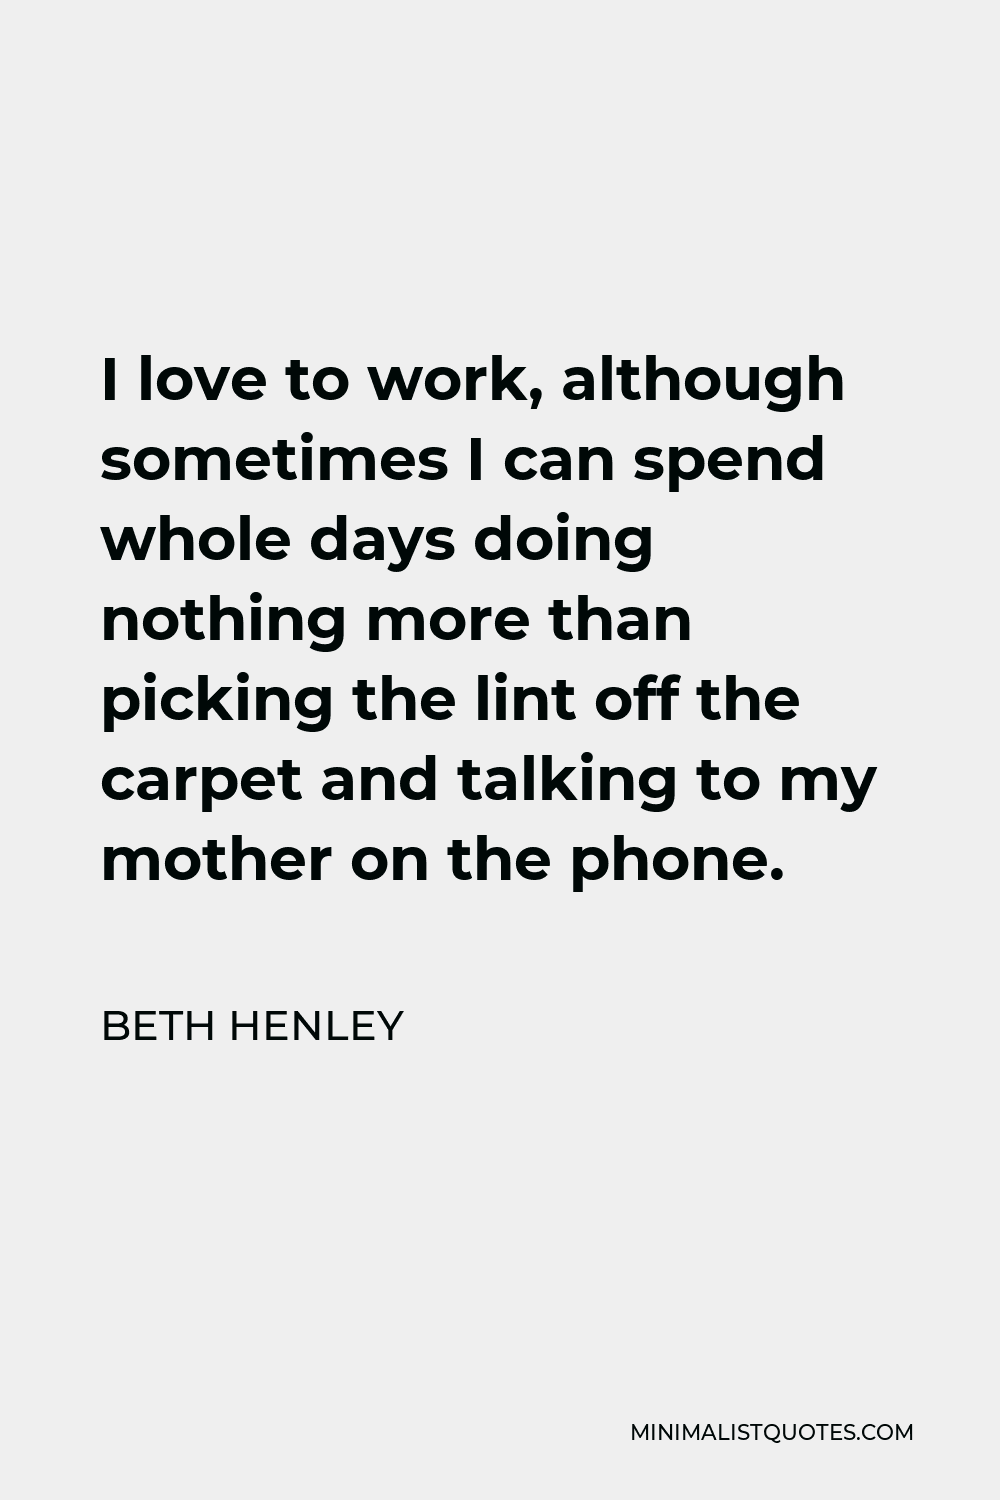 Beth Henley Quote - I love to work, although sometimes I can spend whole days doing nothing more than picking the lint off the carpet and talking to my mother on the phone.